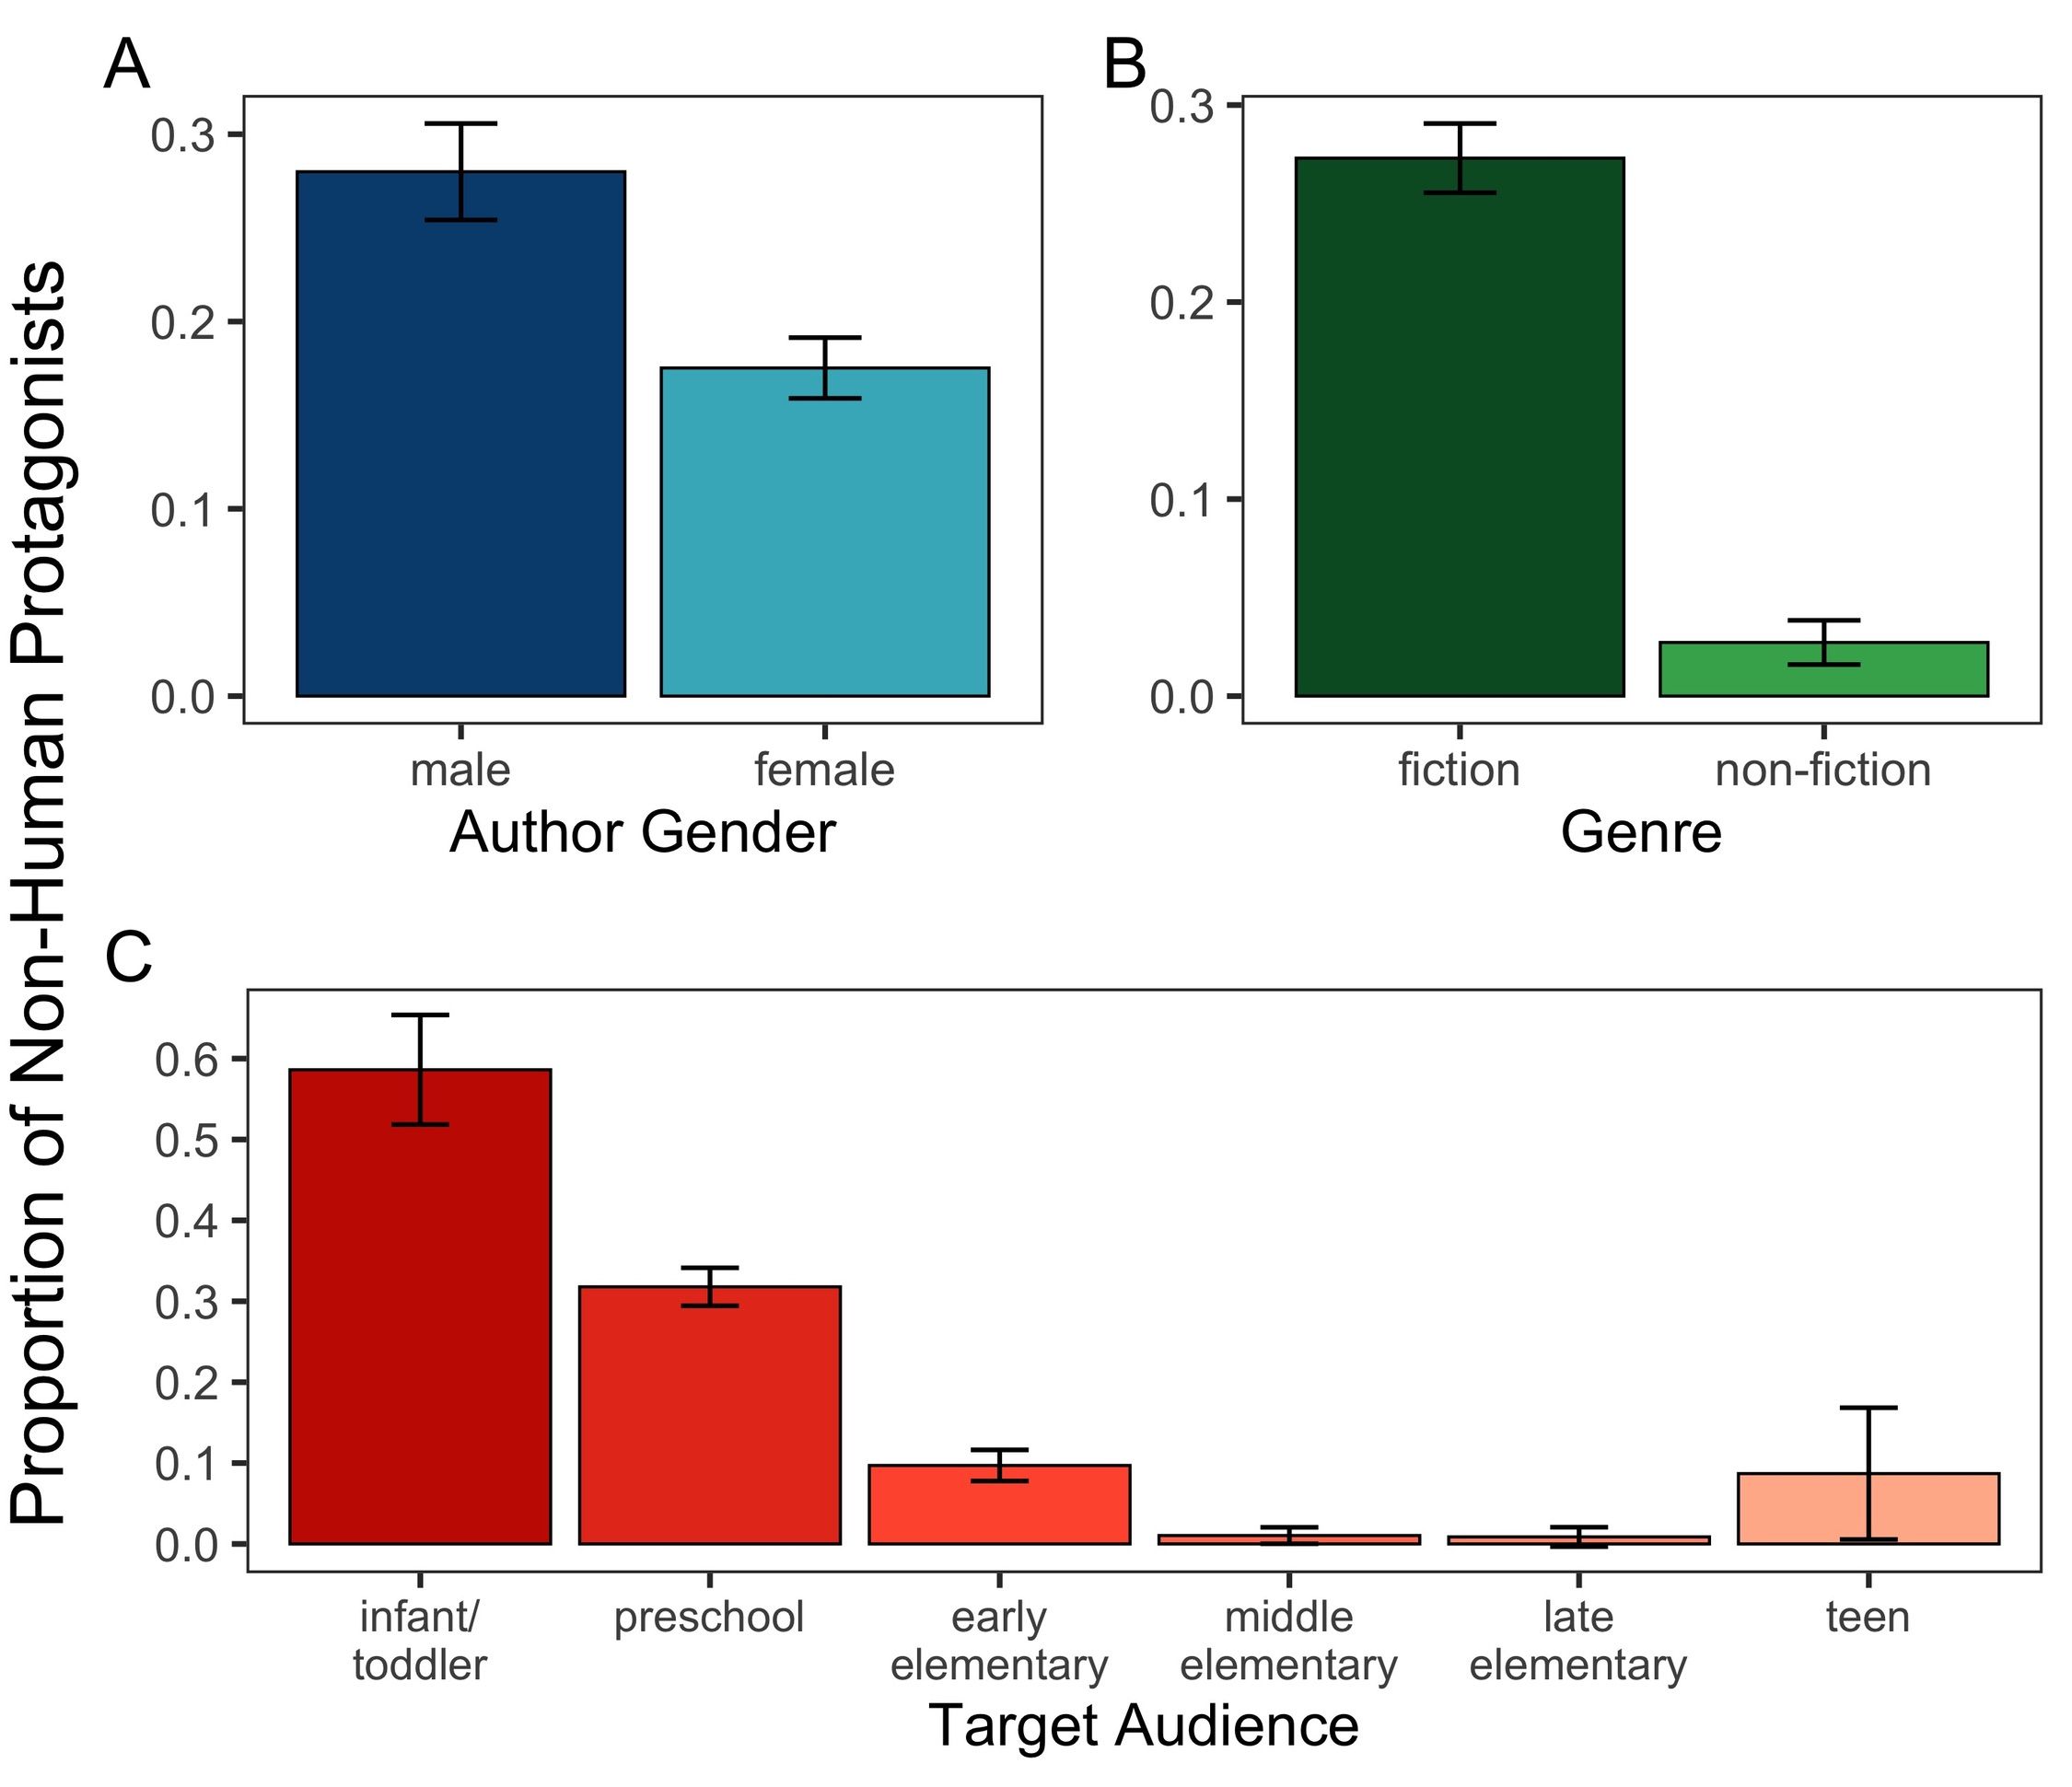 chart of gender distribution by genre and age group, replicated from the open source research paper. 